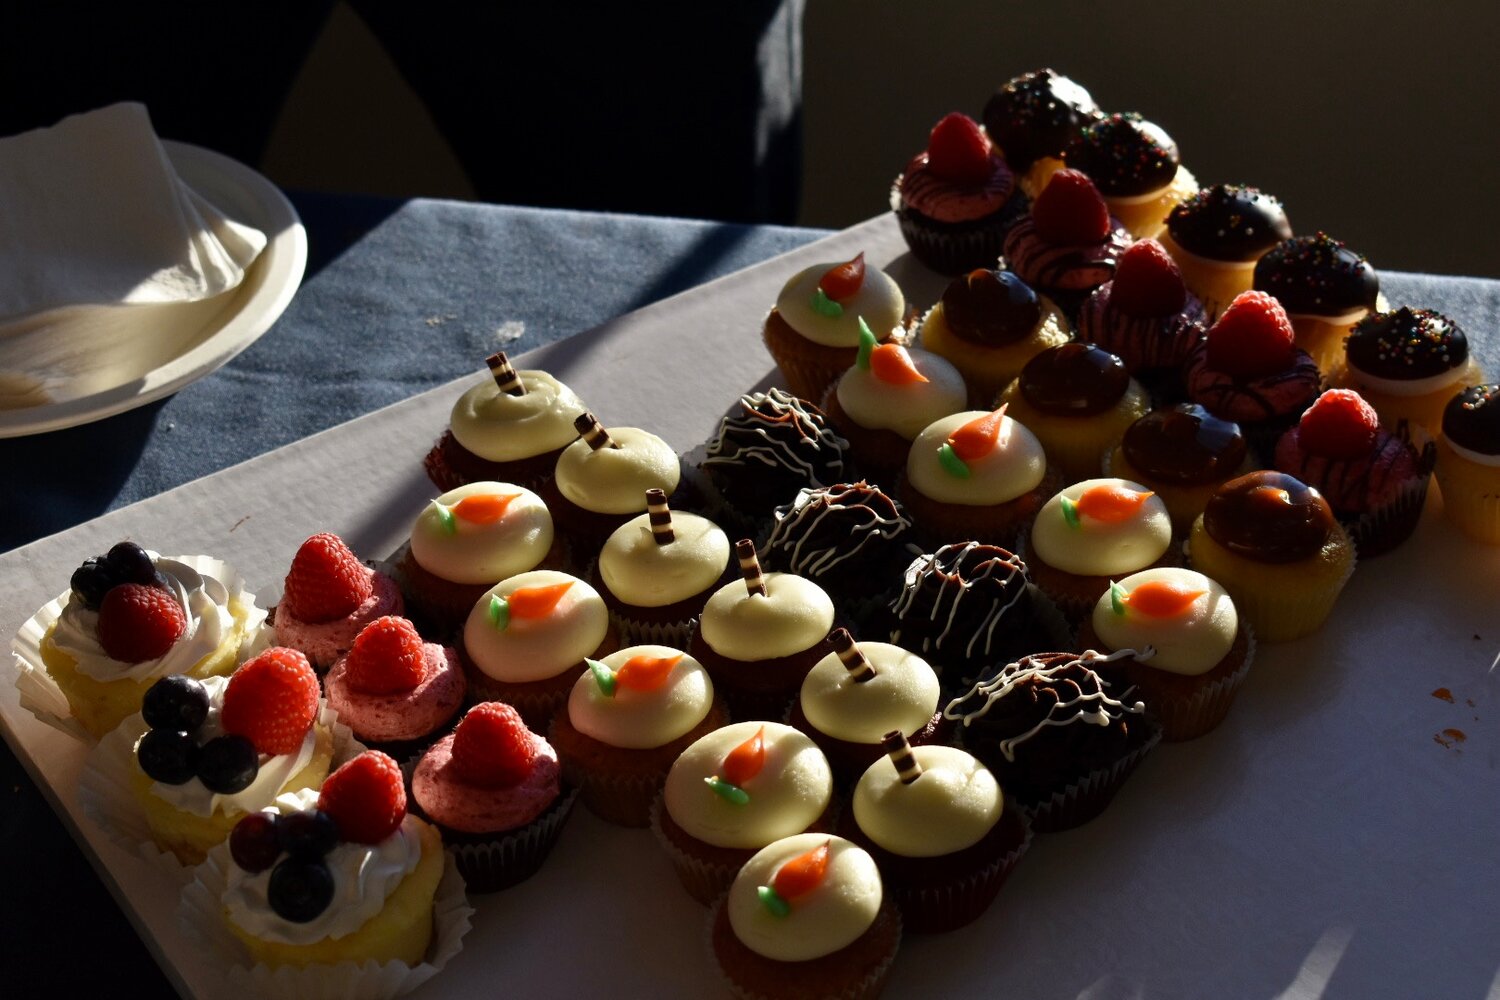 Assorted cookies, cupcakes, and pastries from Dulce de Leche Cake Shop were a big hit at the charity event.